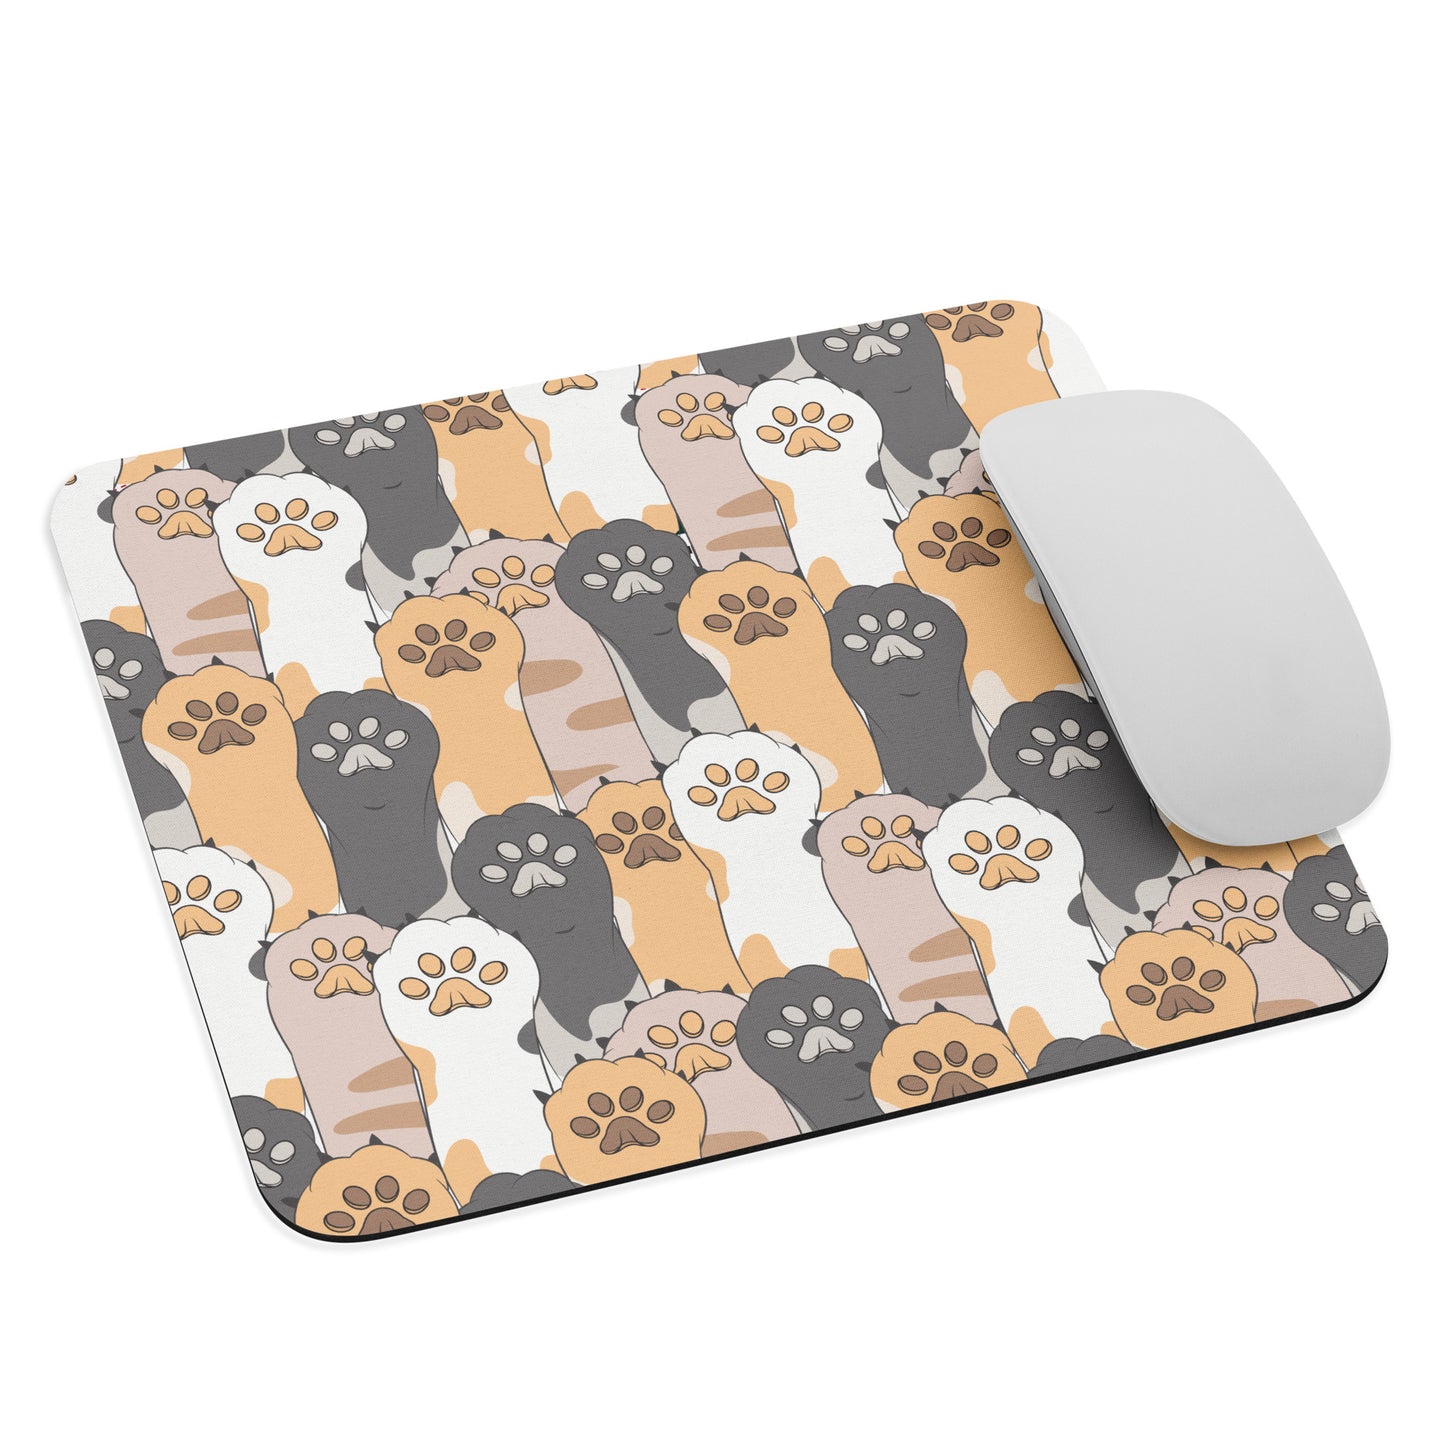 Cute Kawaii Gaming Mouse pad, Computer Keyboard Office Accessories, Cute Office Decor